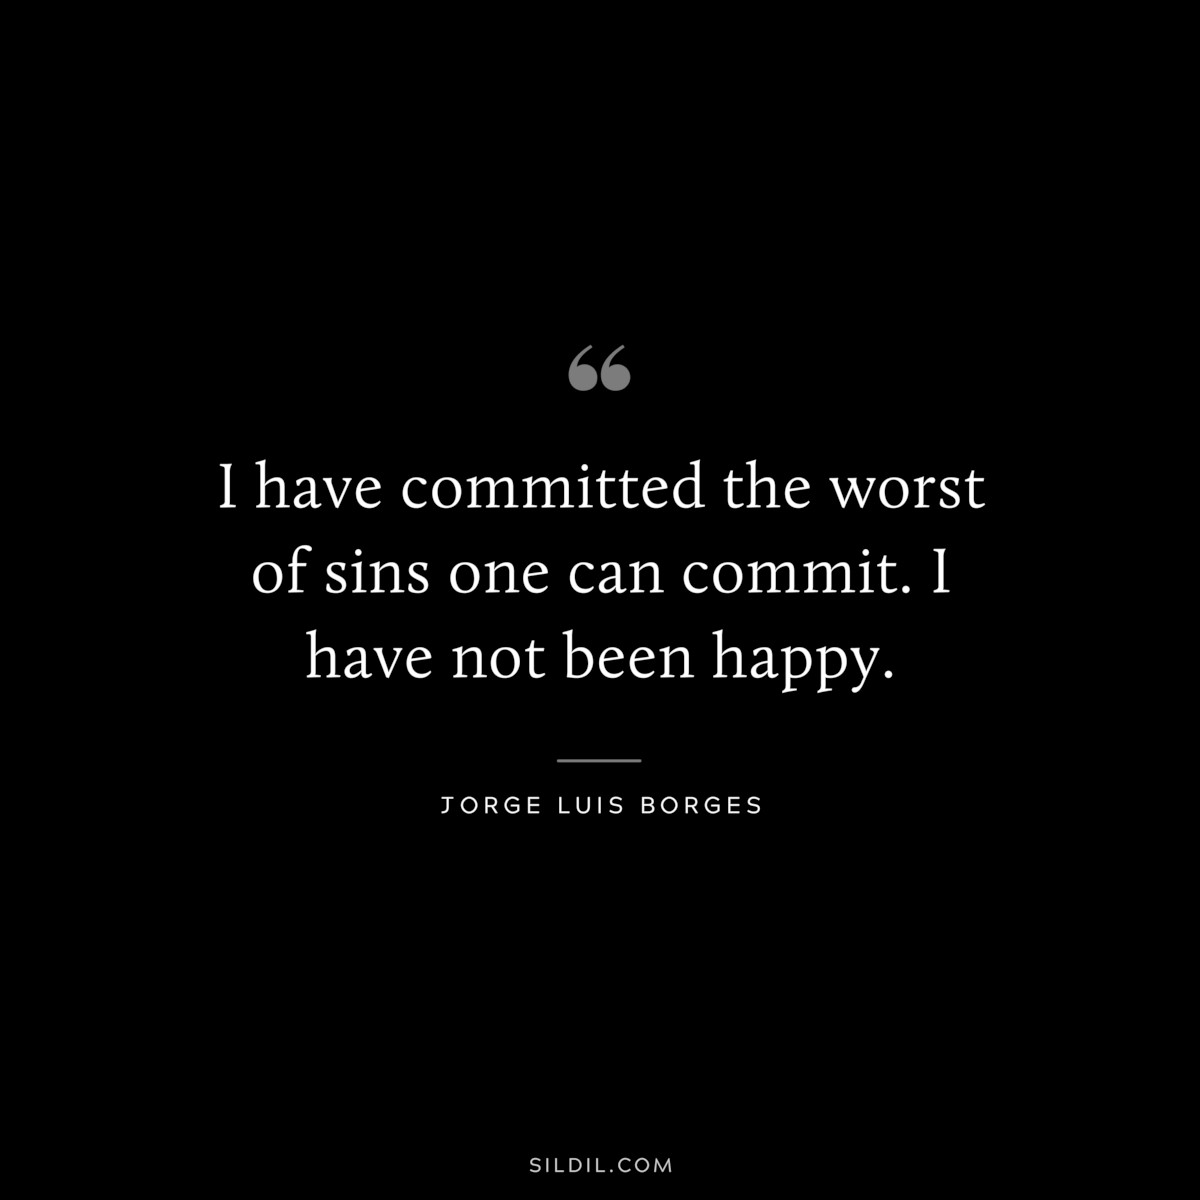 I have committed the worst of sins one can commit. I have not been happy. ― Jorge Luis Borges